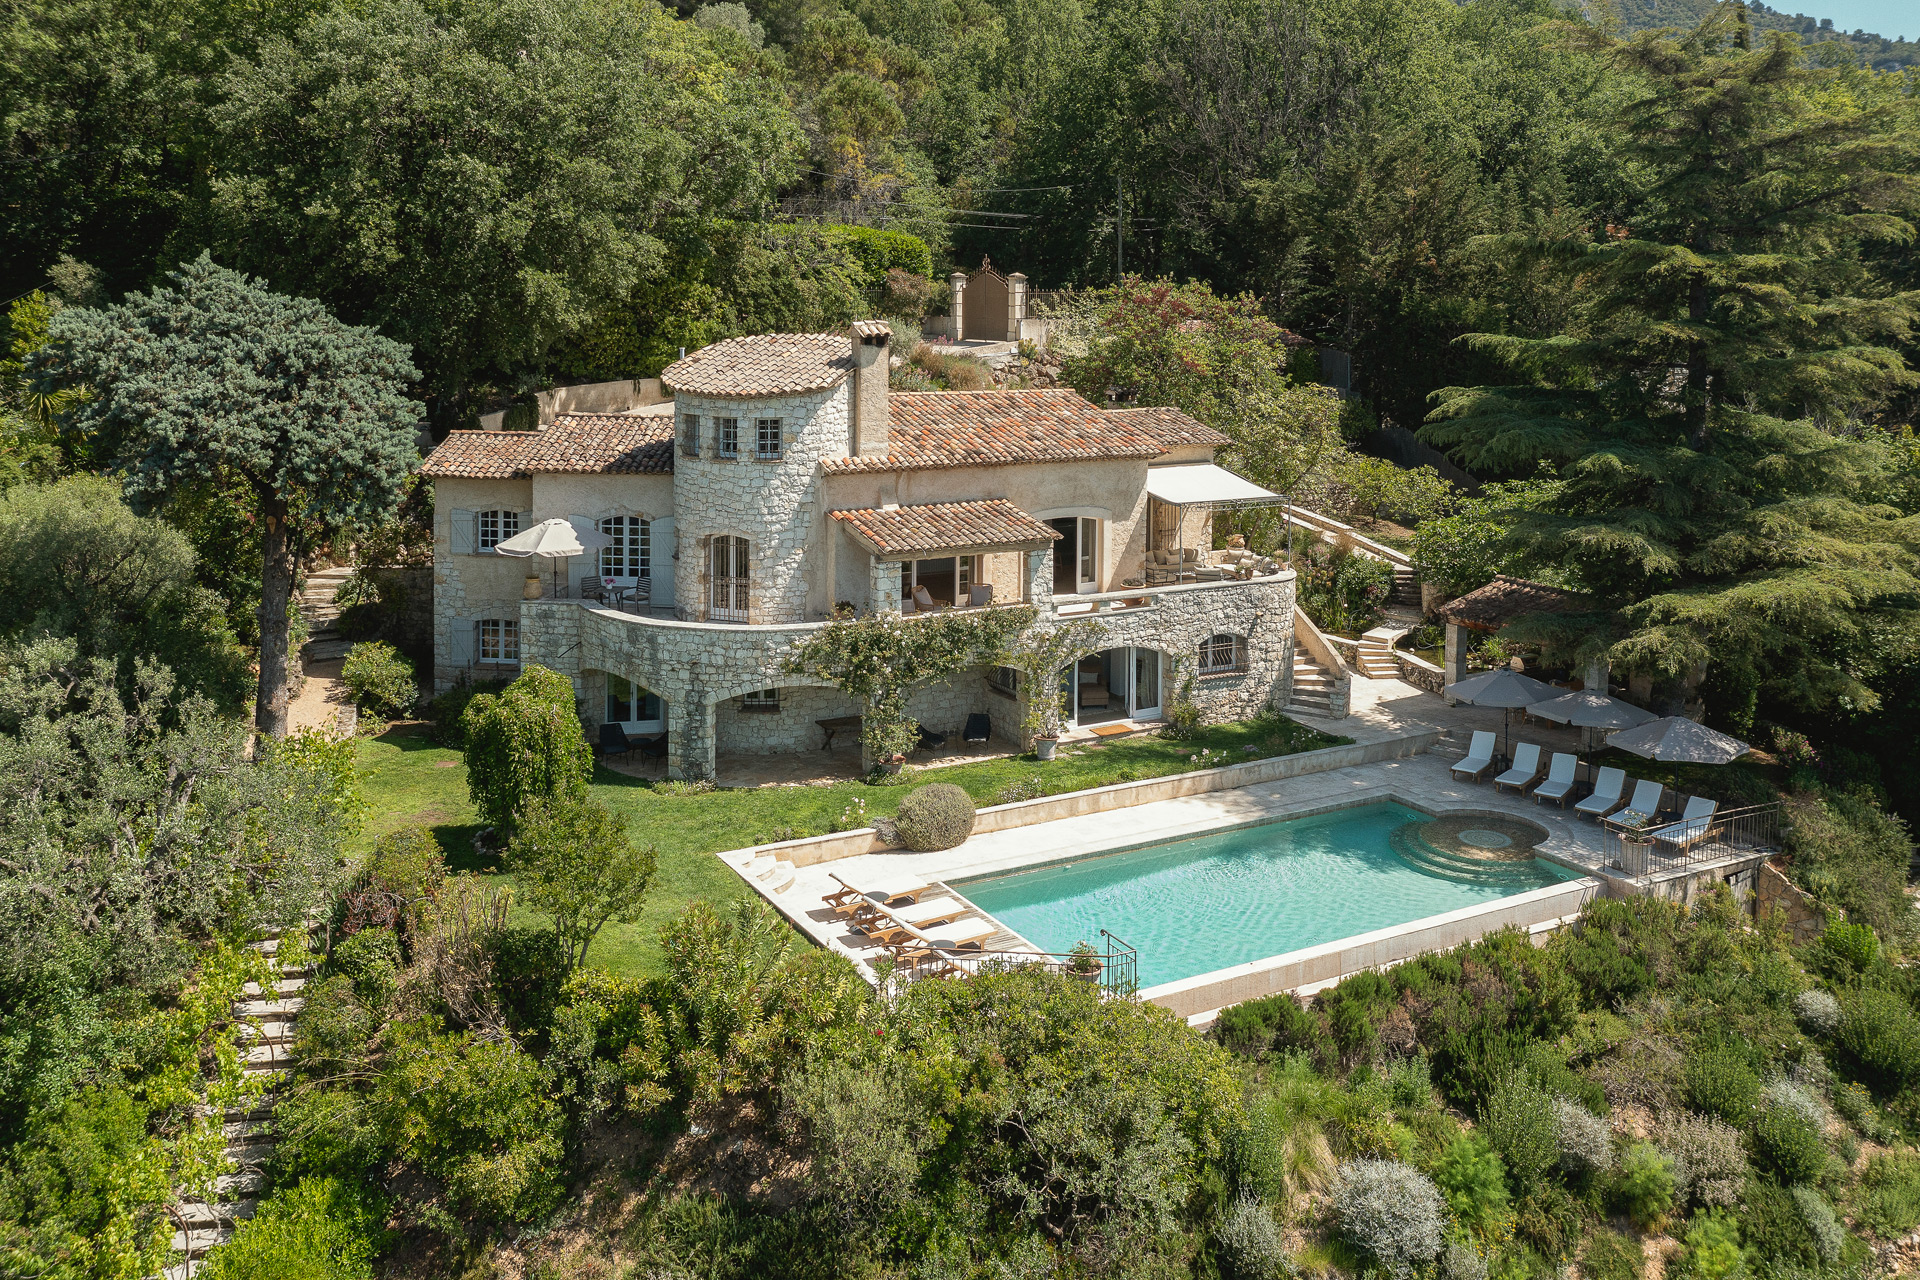 Aerial view of a French holiday home with an outdoor pool and trees surrounding